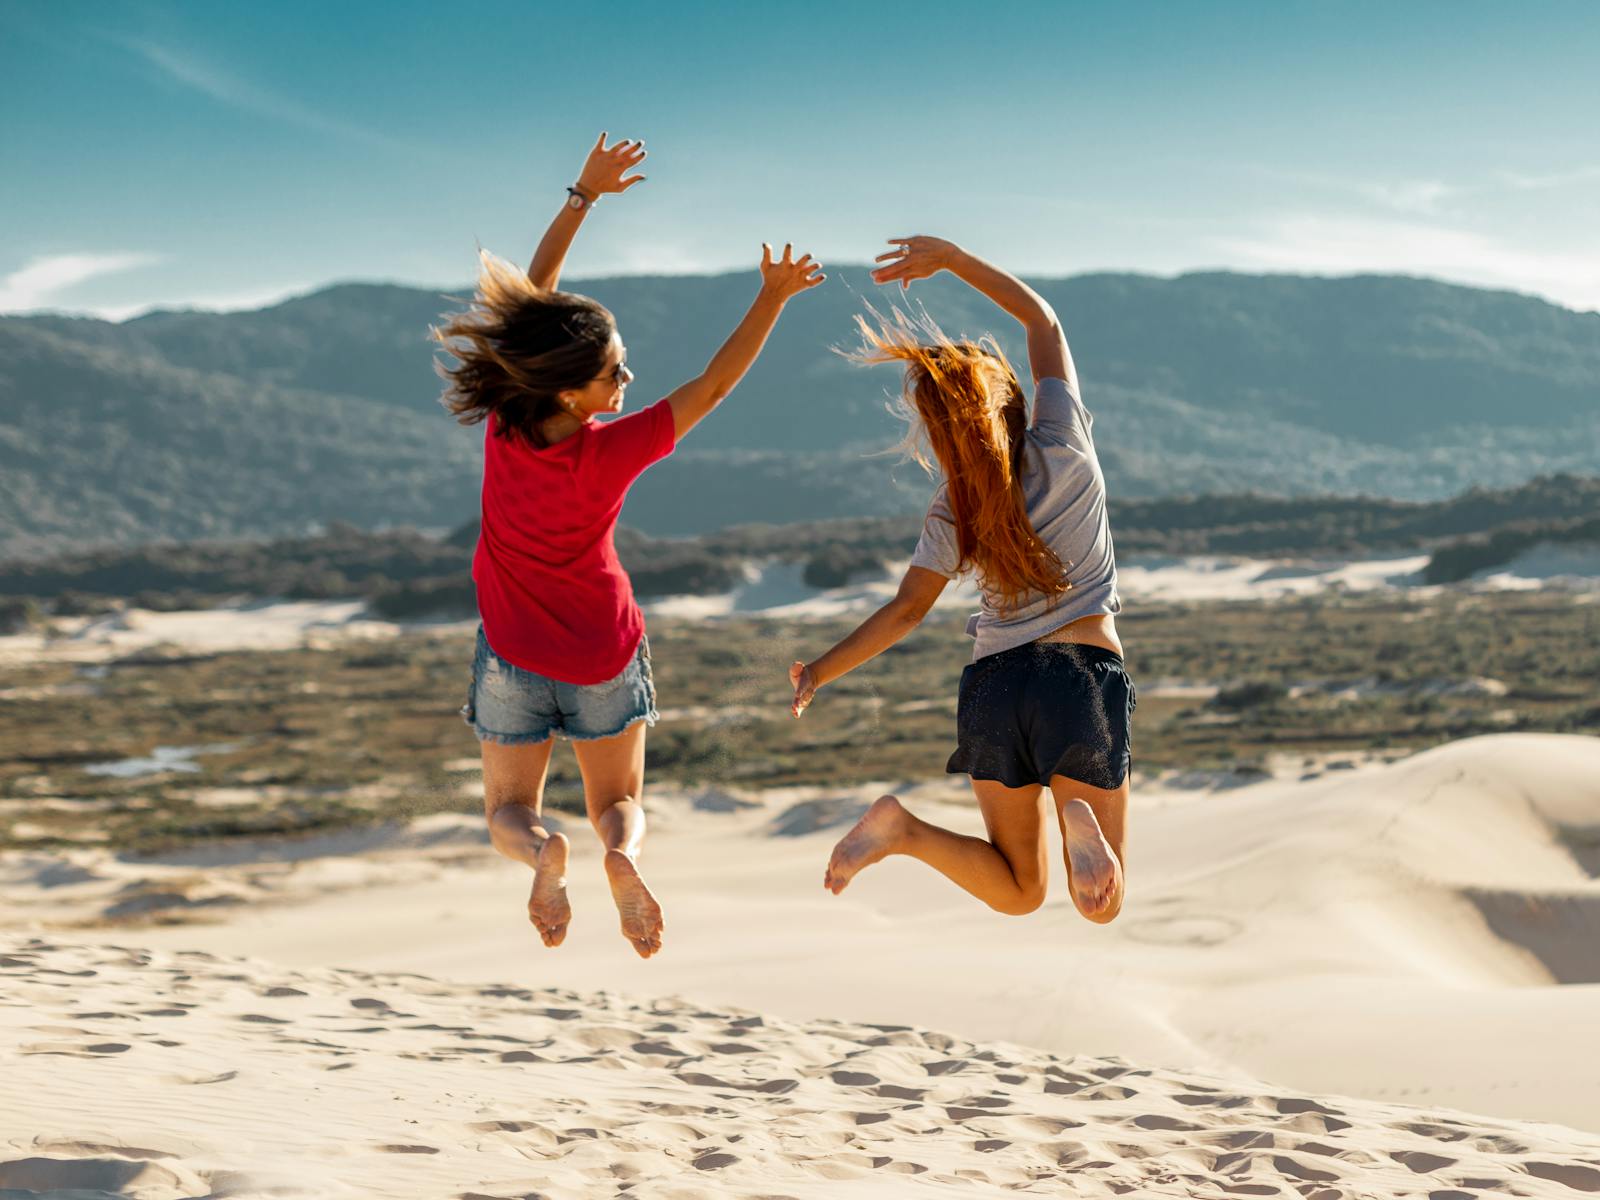 Two friends jumping up together on the sand.